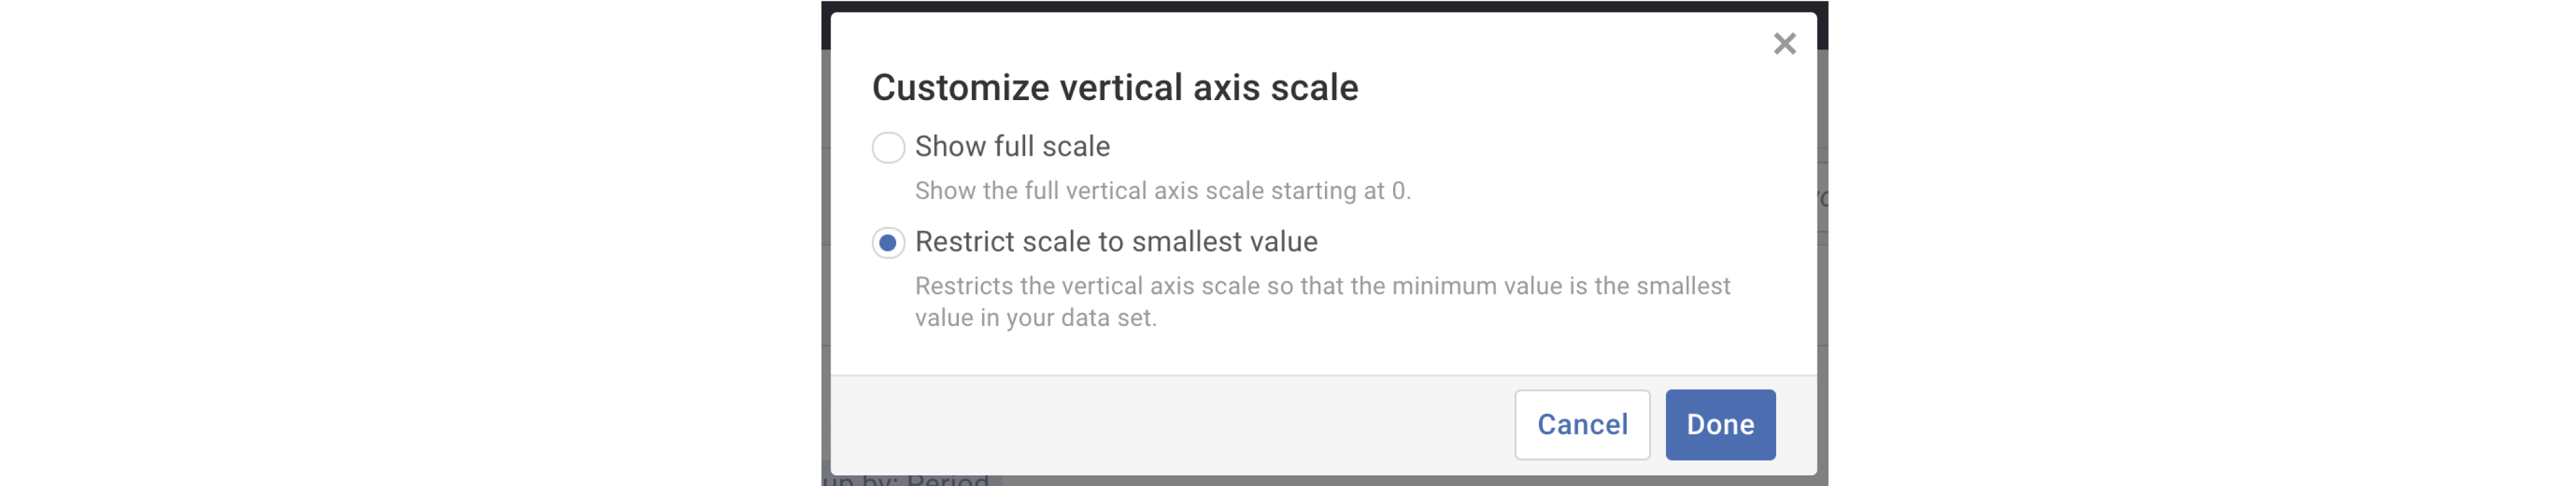 Restrict_vertical_axis_scale_to_smallest_value.png